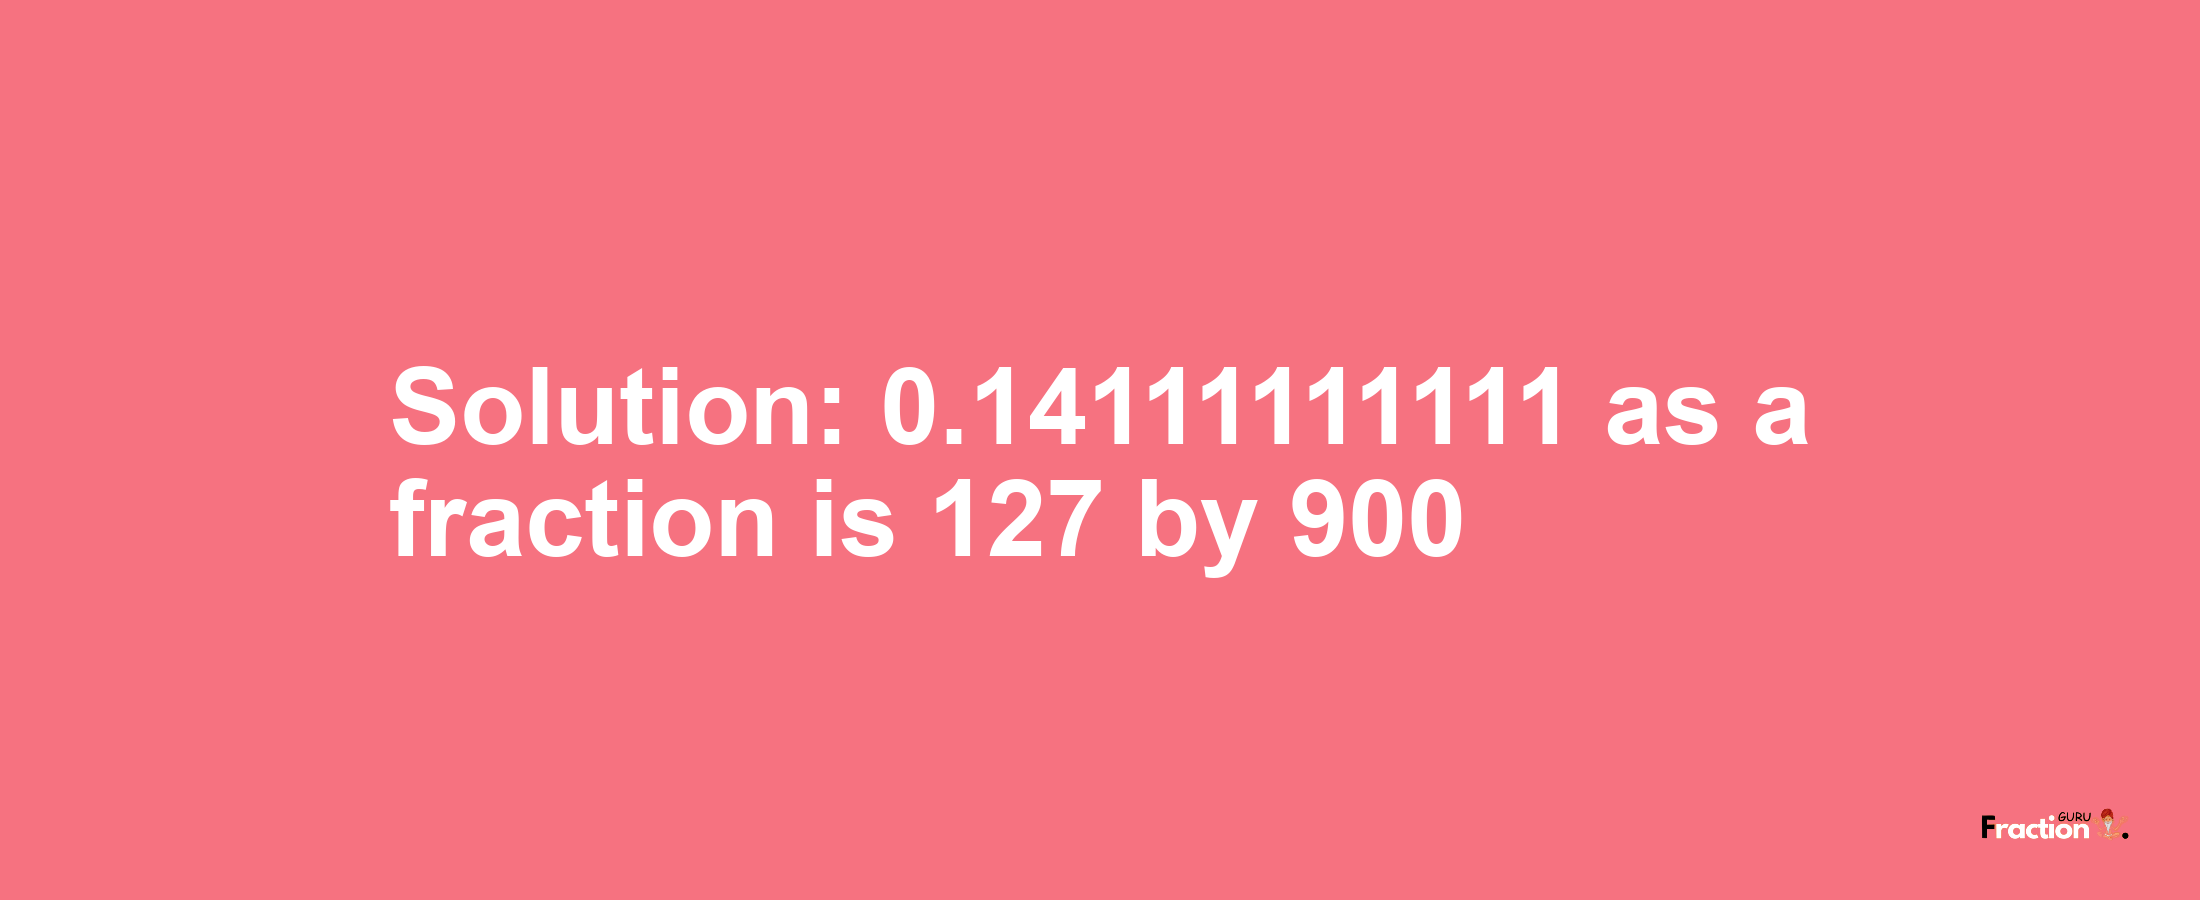 Solution:0.14111111111 as a fraction is 127/900